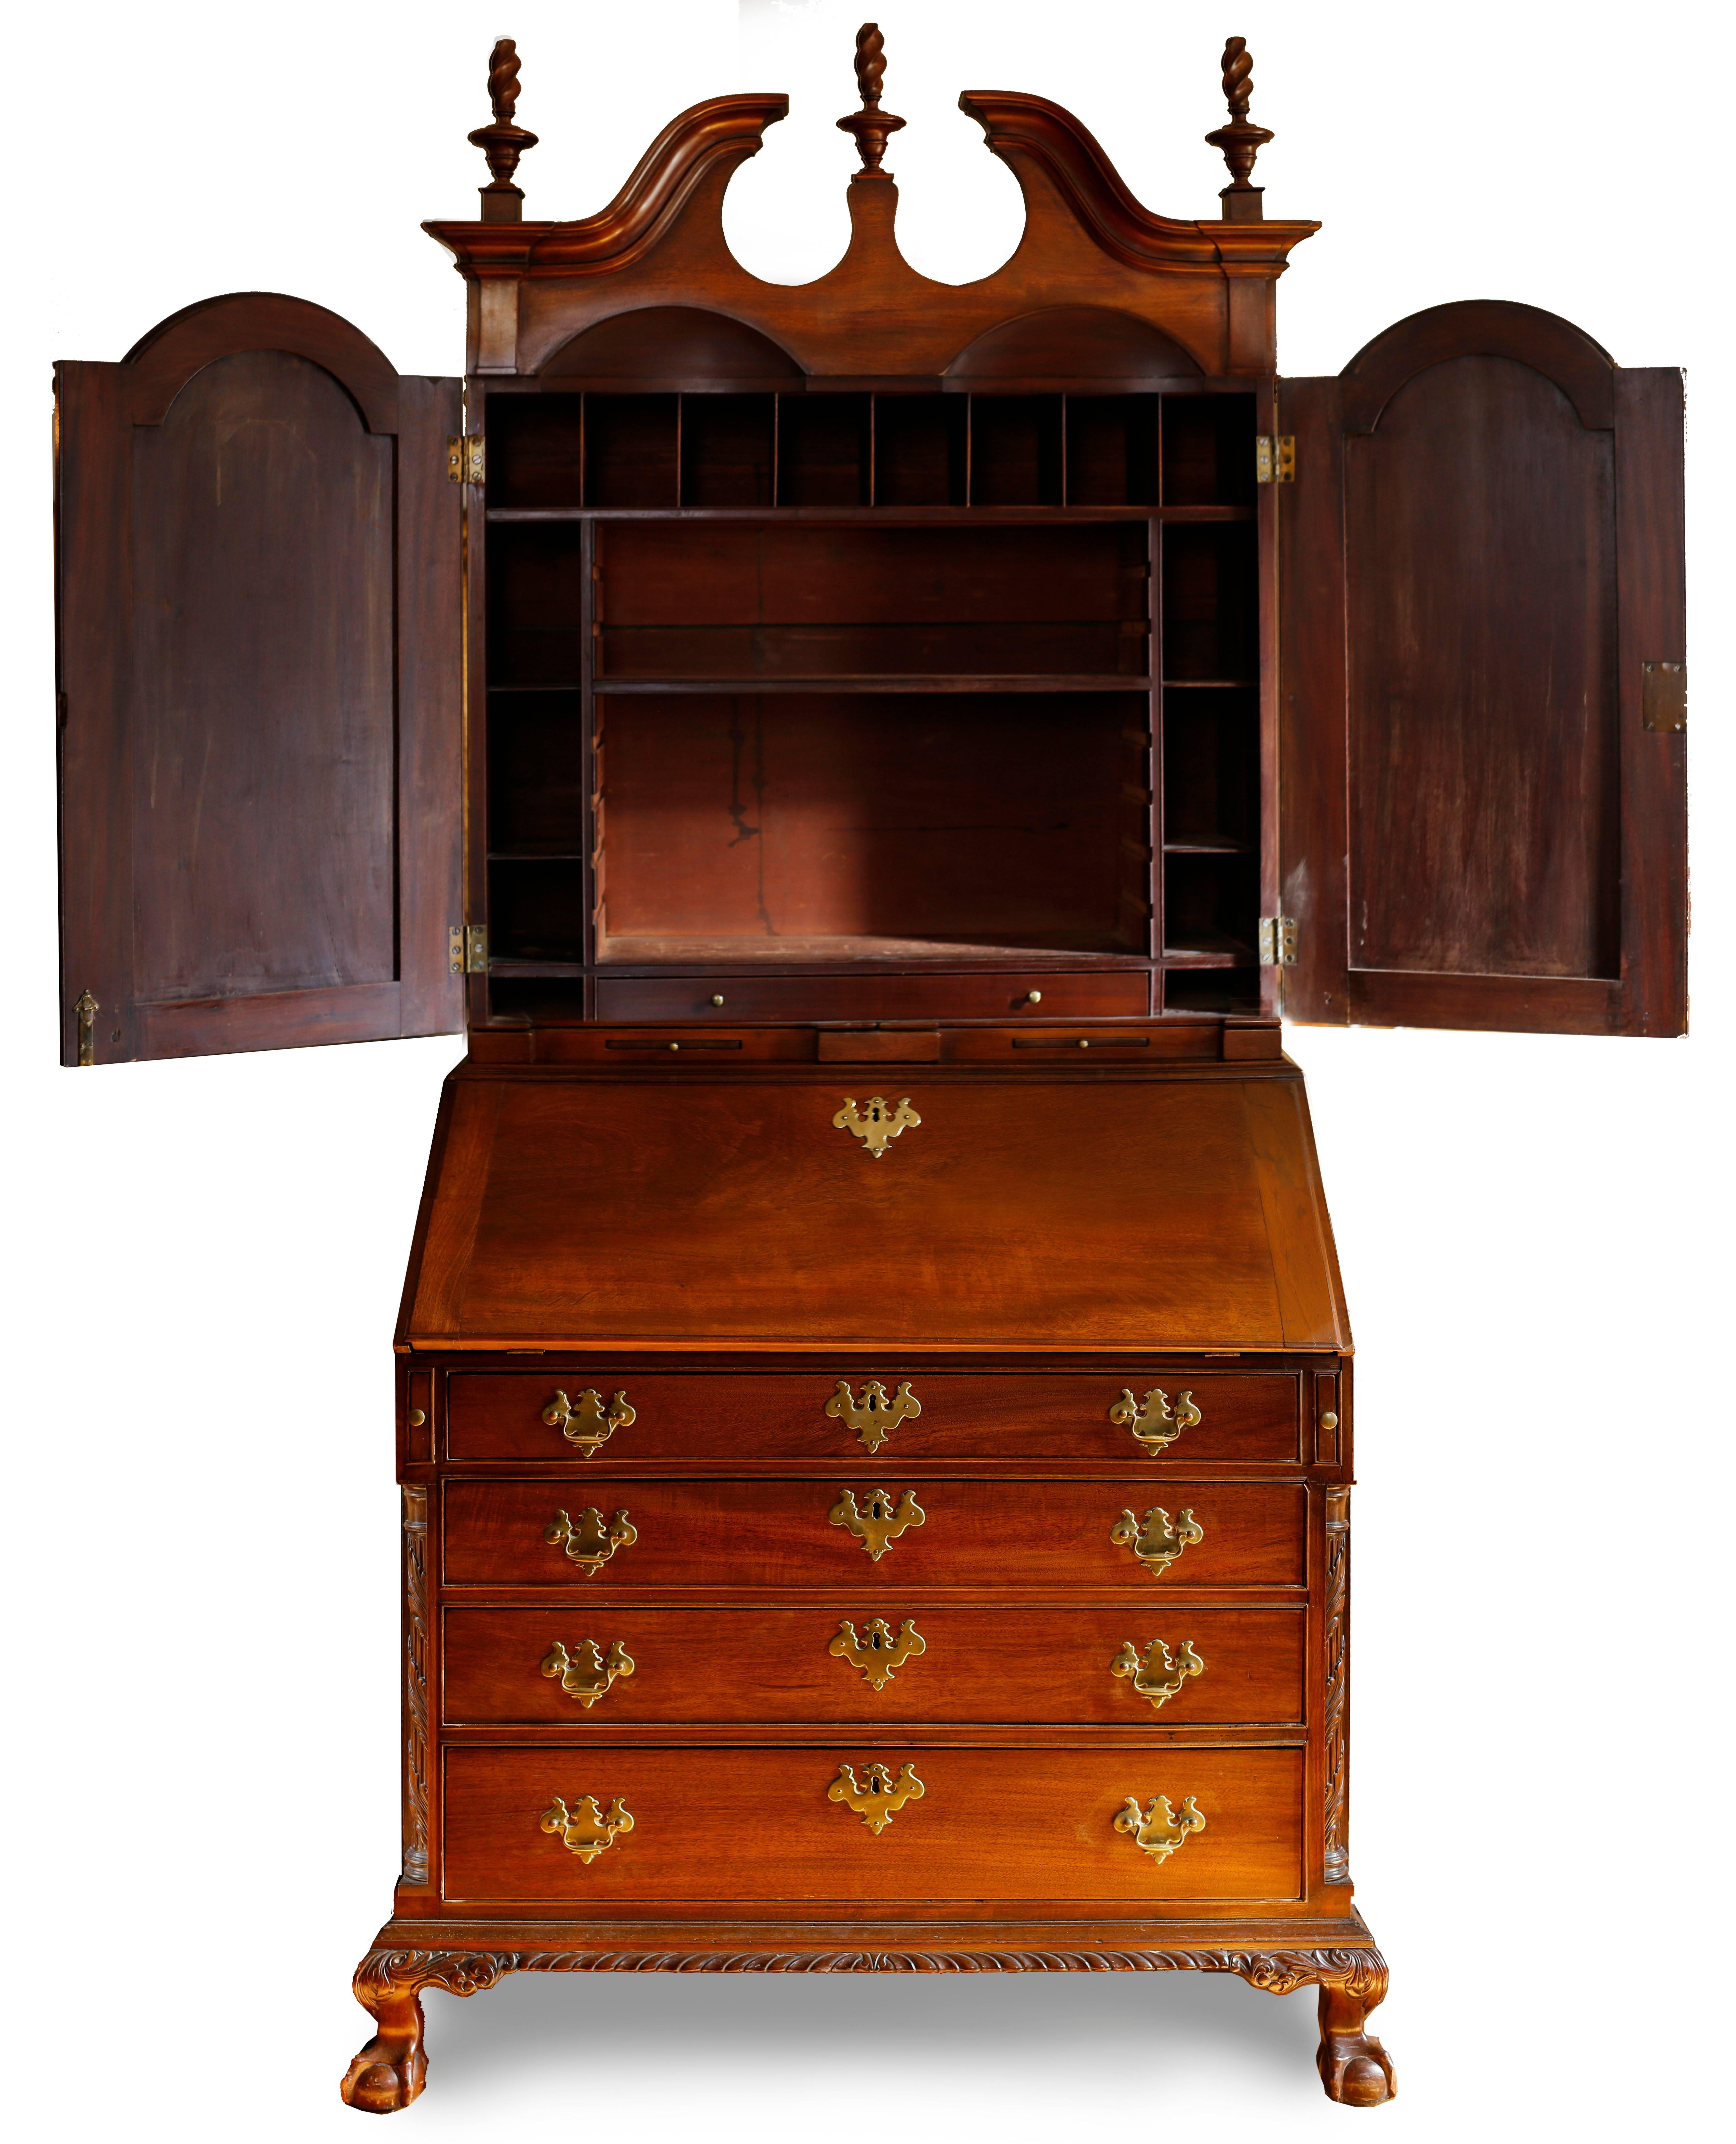 A stunning piece of early American furniture with excellent provenance, this secretary bookcase was designed and constructed by one of the best firms in 18th century Boston with is fine classical forms and proportions. Corkscrew finials, fluted